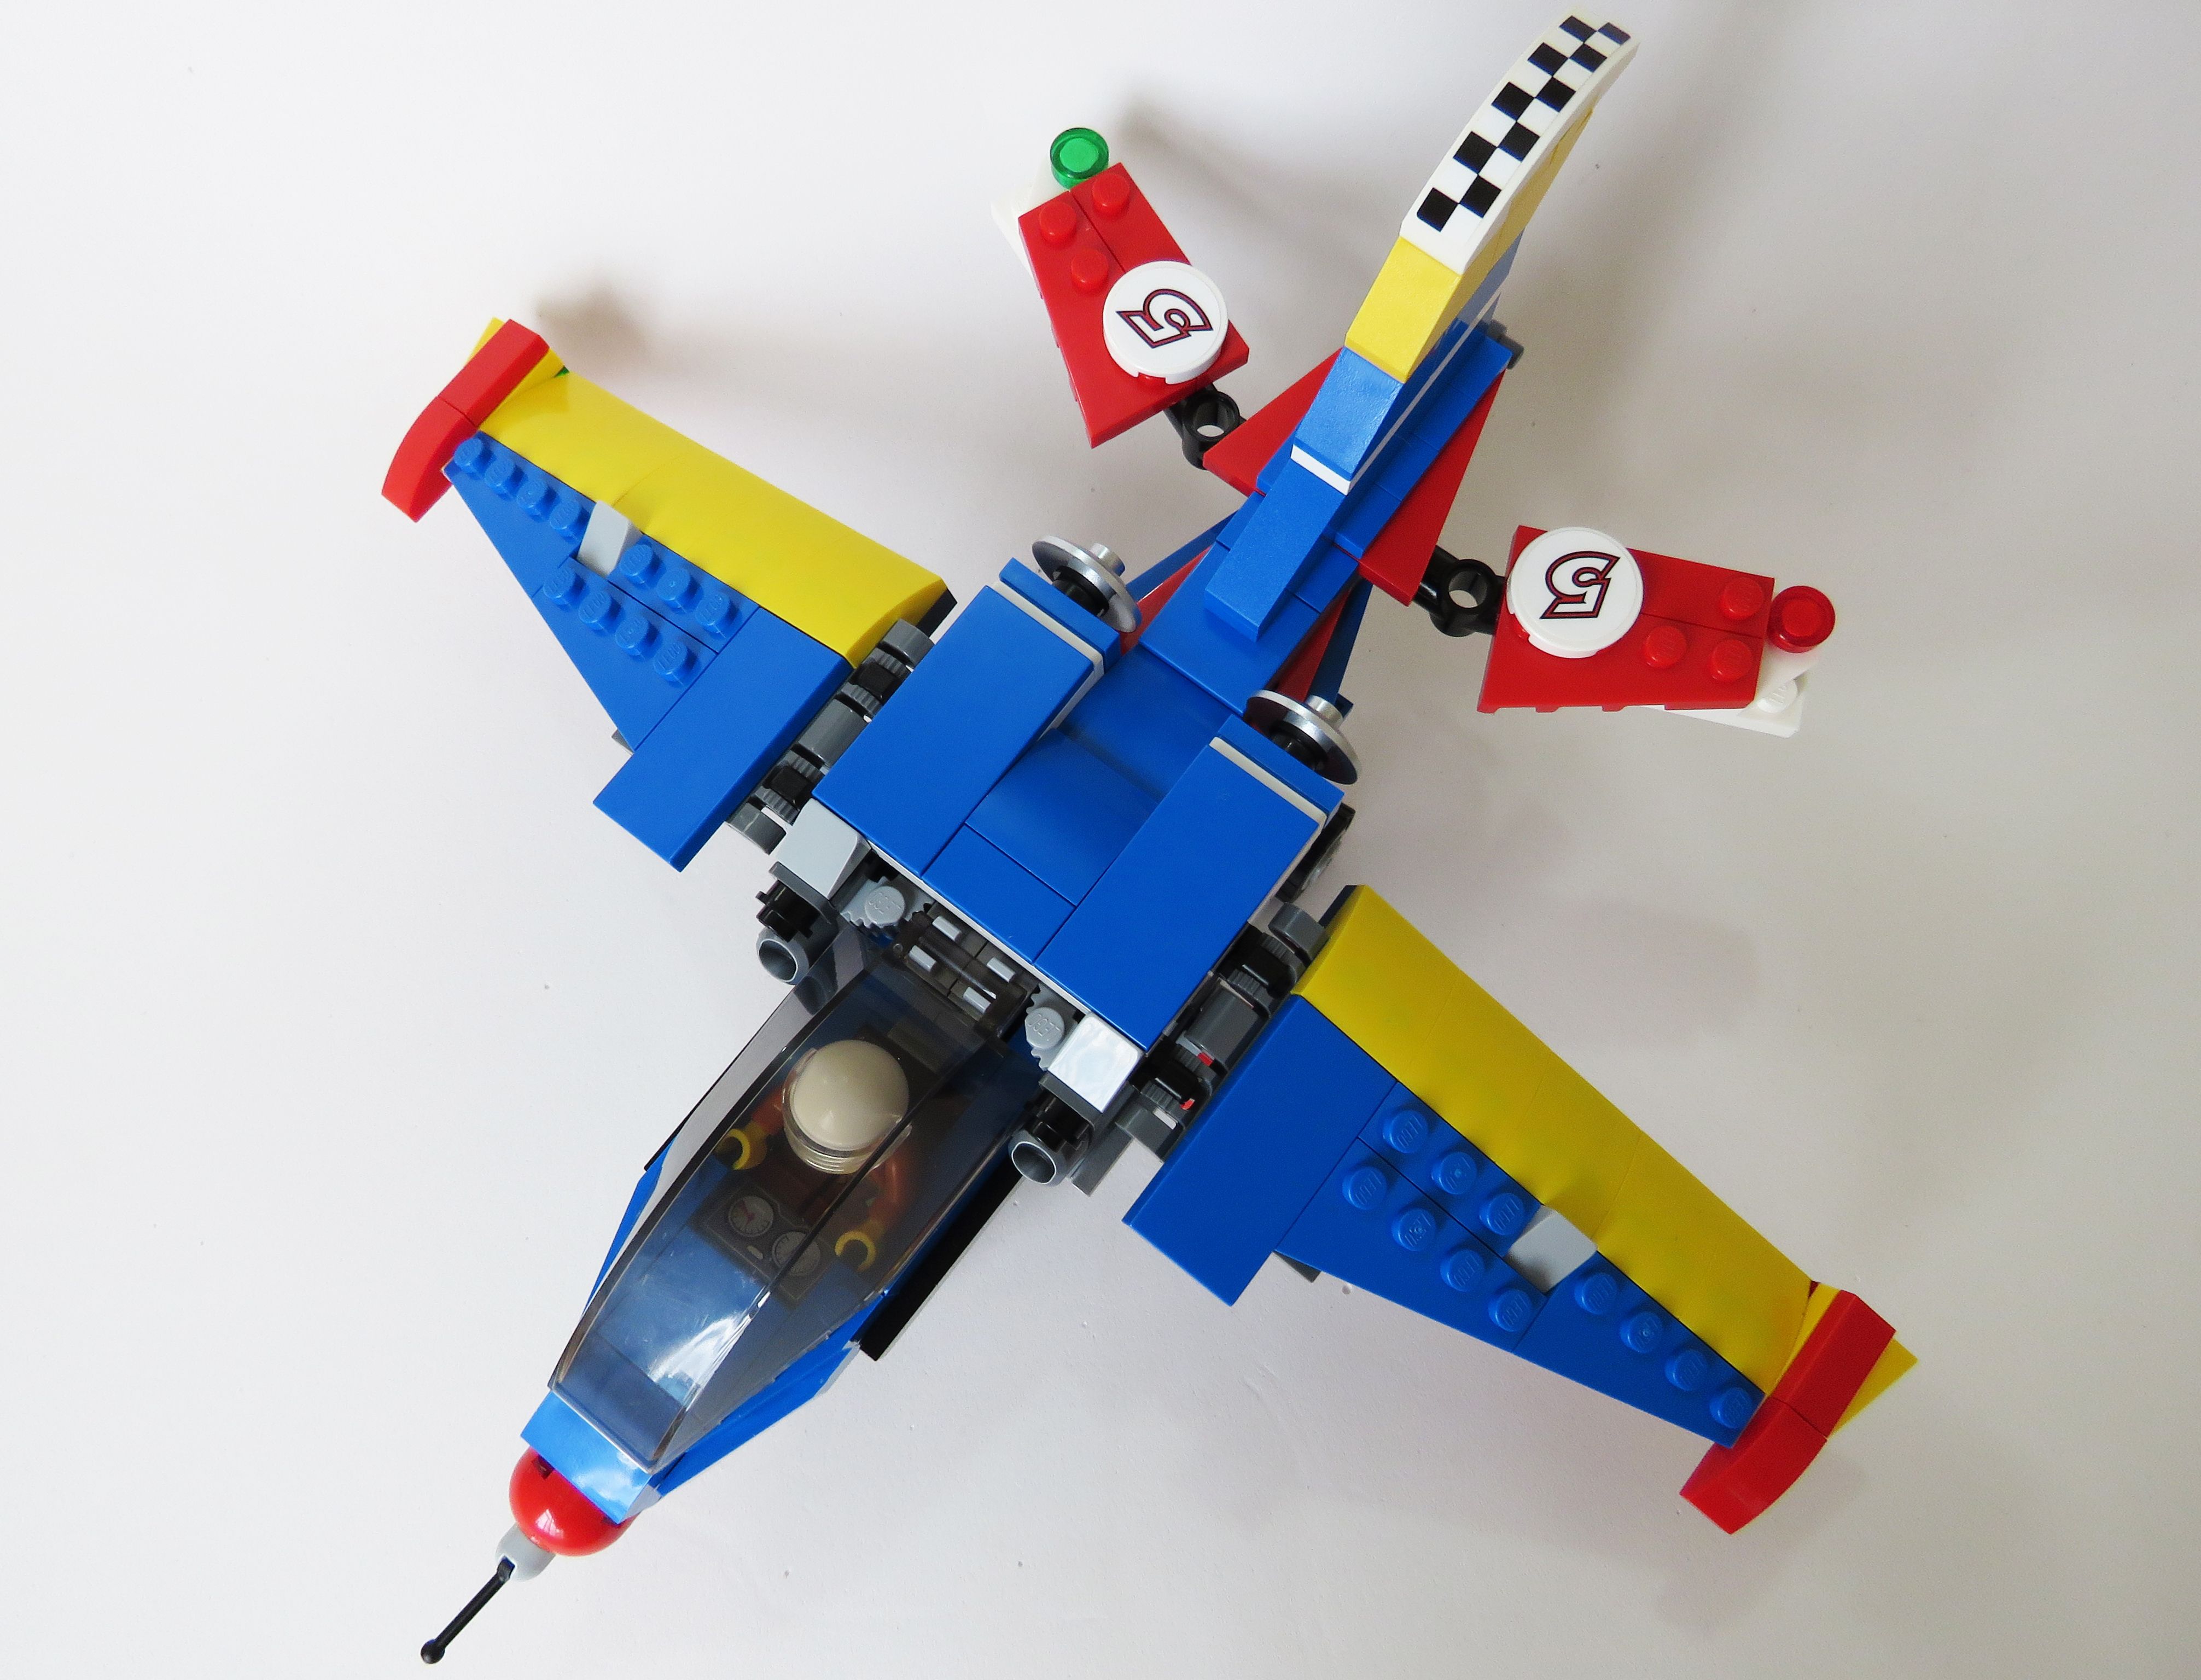 lego 3 in 1 plane instructions